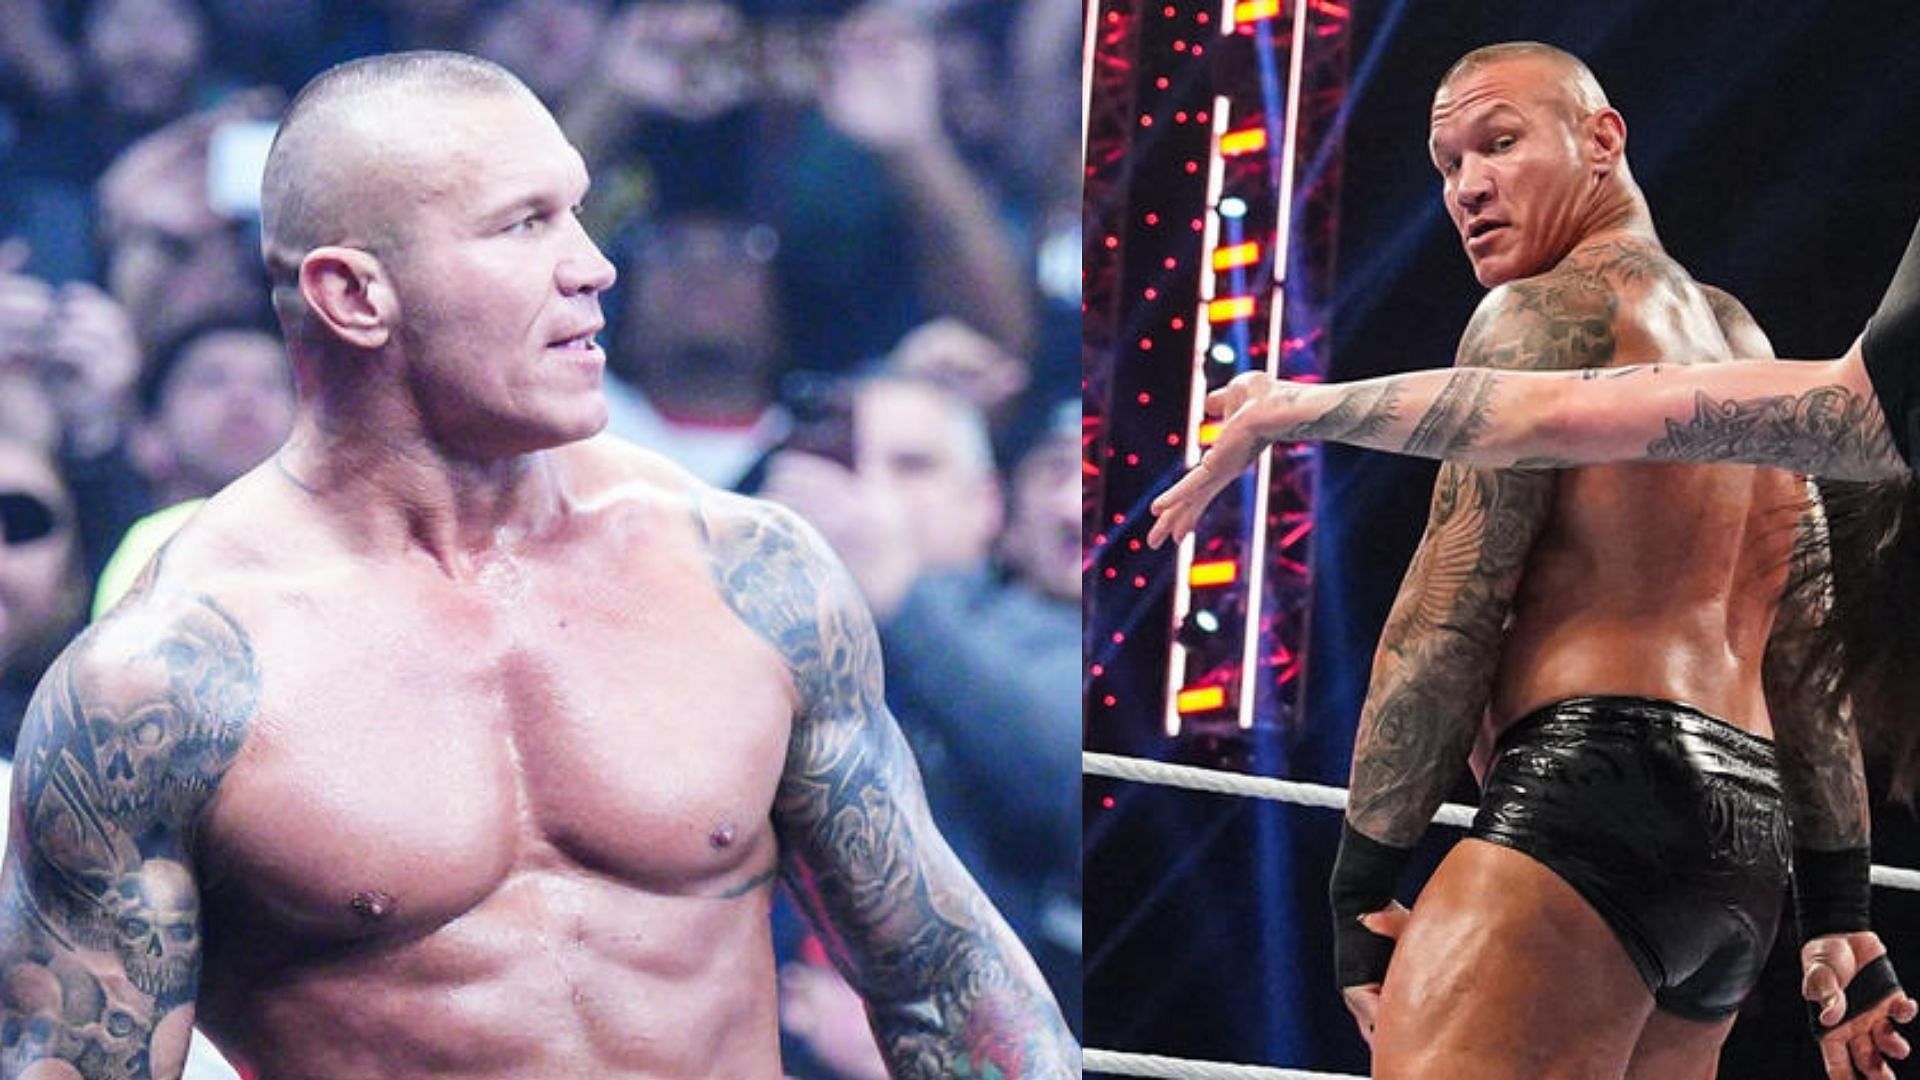 Randy Orton could end up with a new alliance at the Royal Rumble